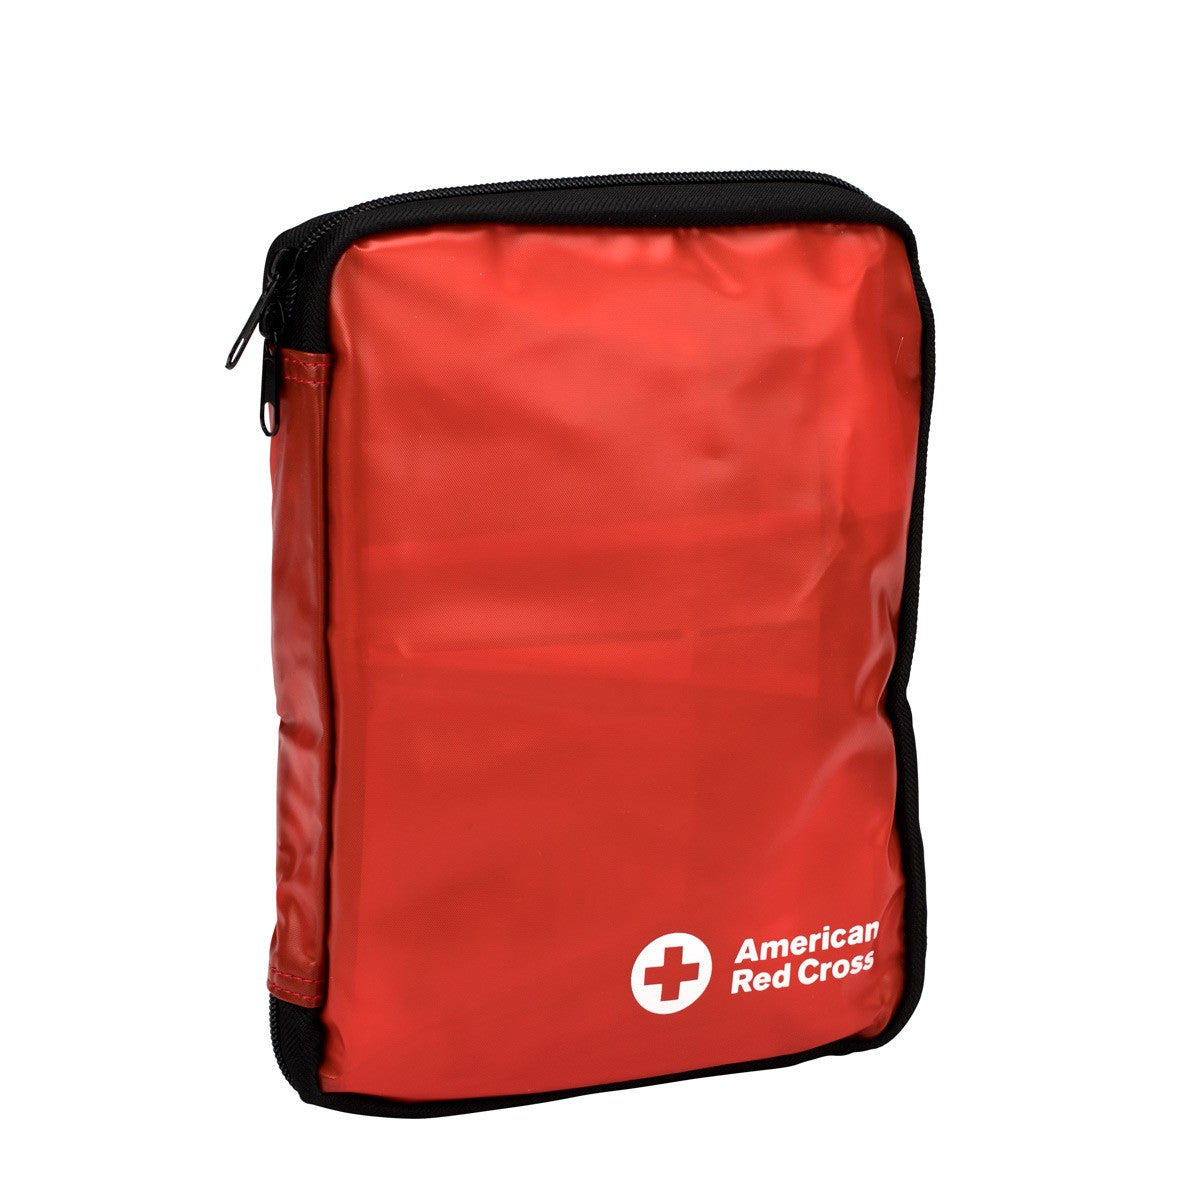 Be Red Cross Ready First Aid Kit - W-9165-RC